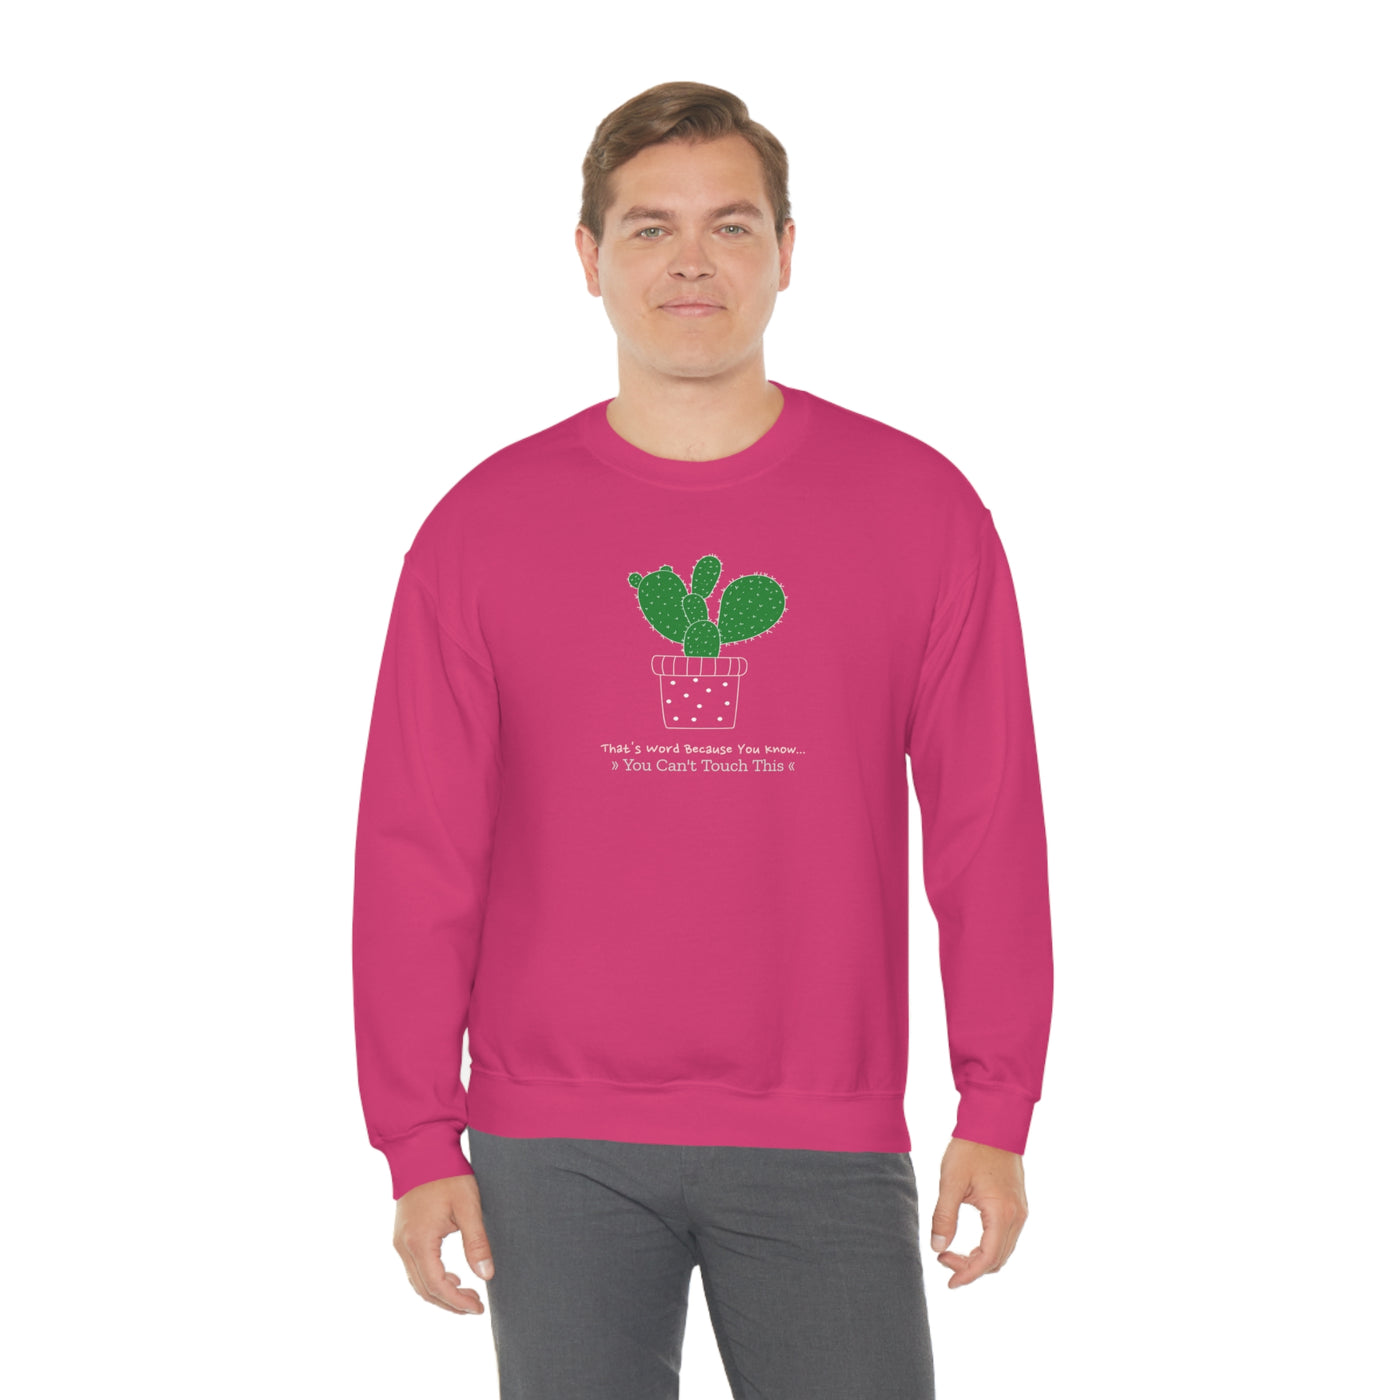 That's Word Because You Know...You Can't Touch This Crewneck Sweatshirt